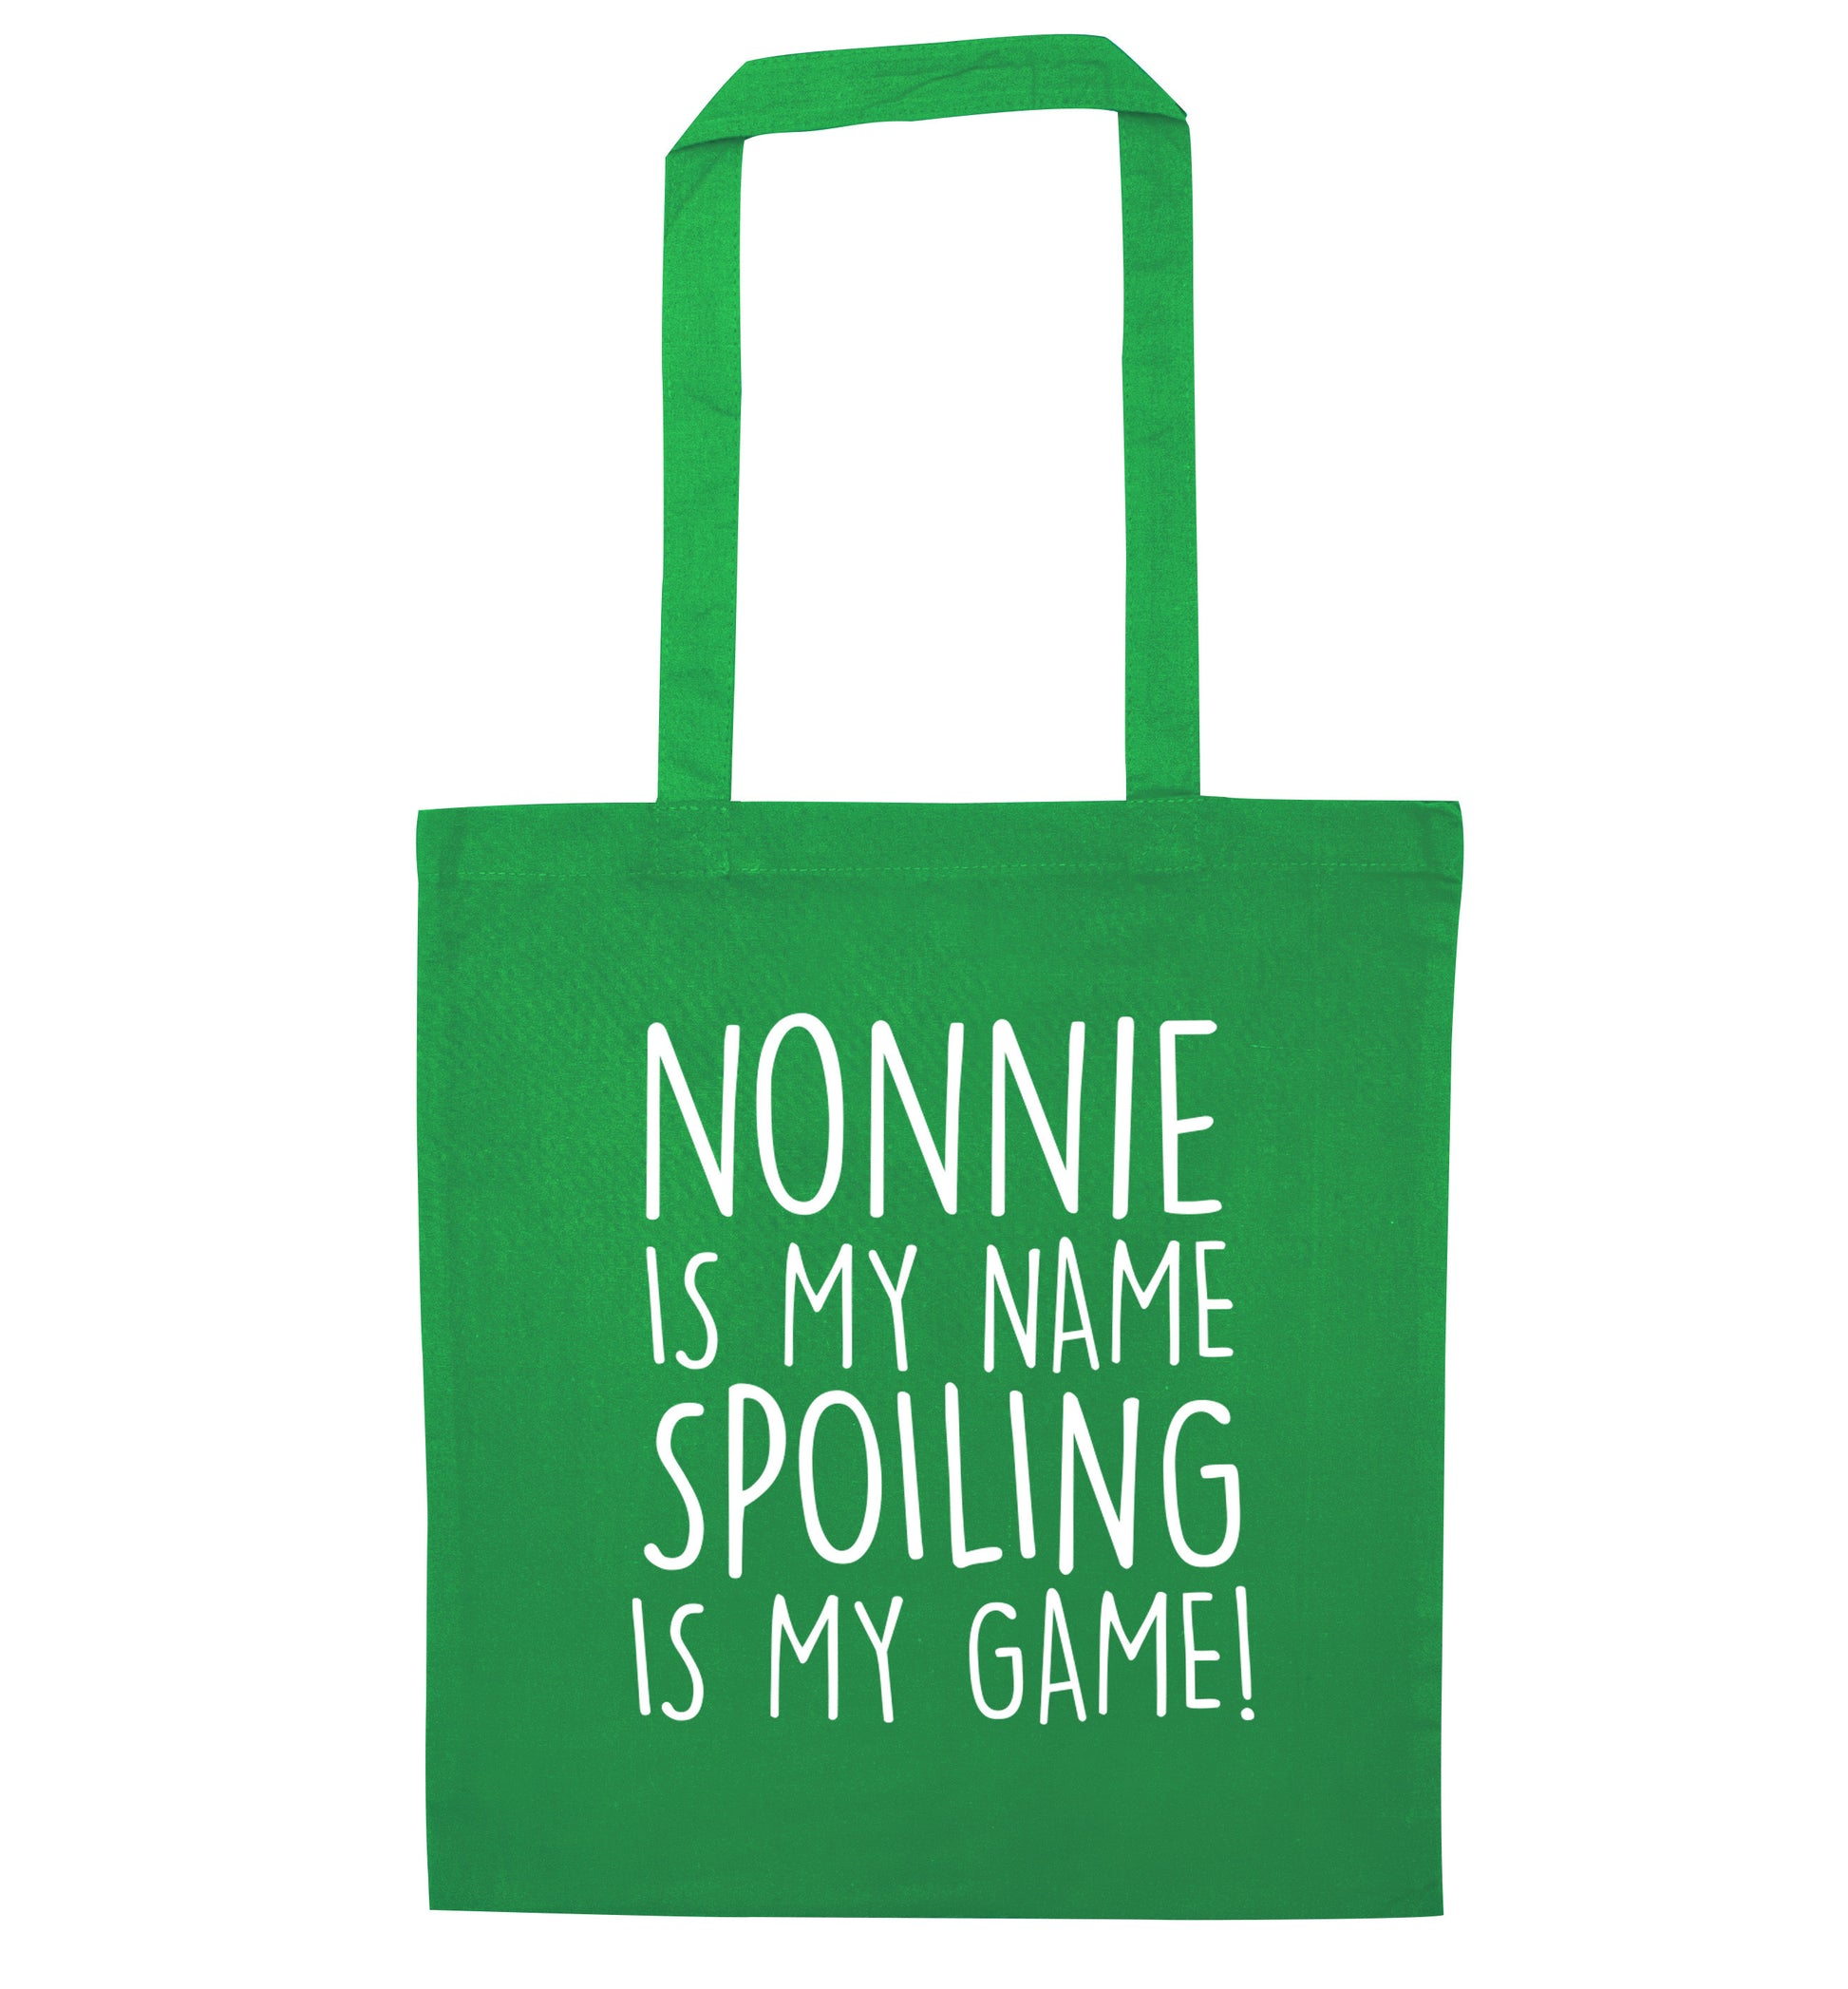 Nonnie is my name, spoiling is my game green tote bag